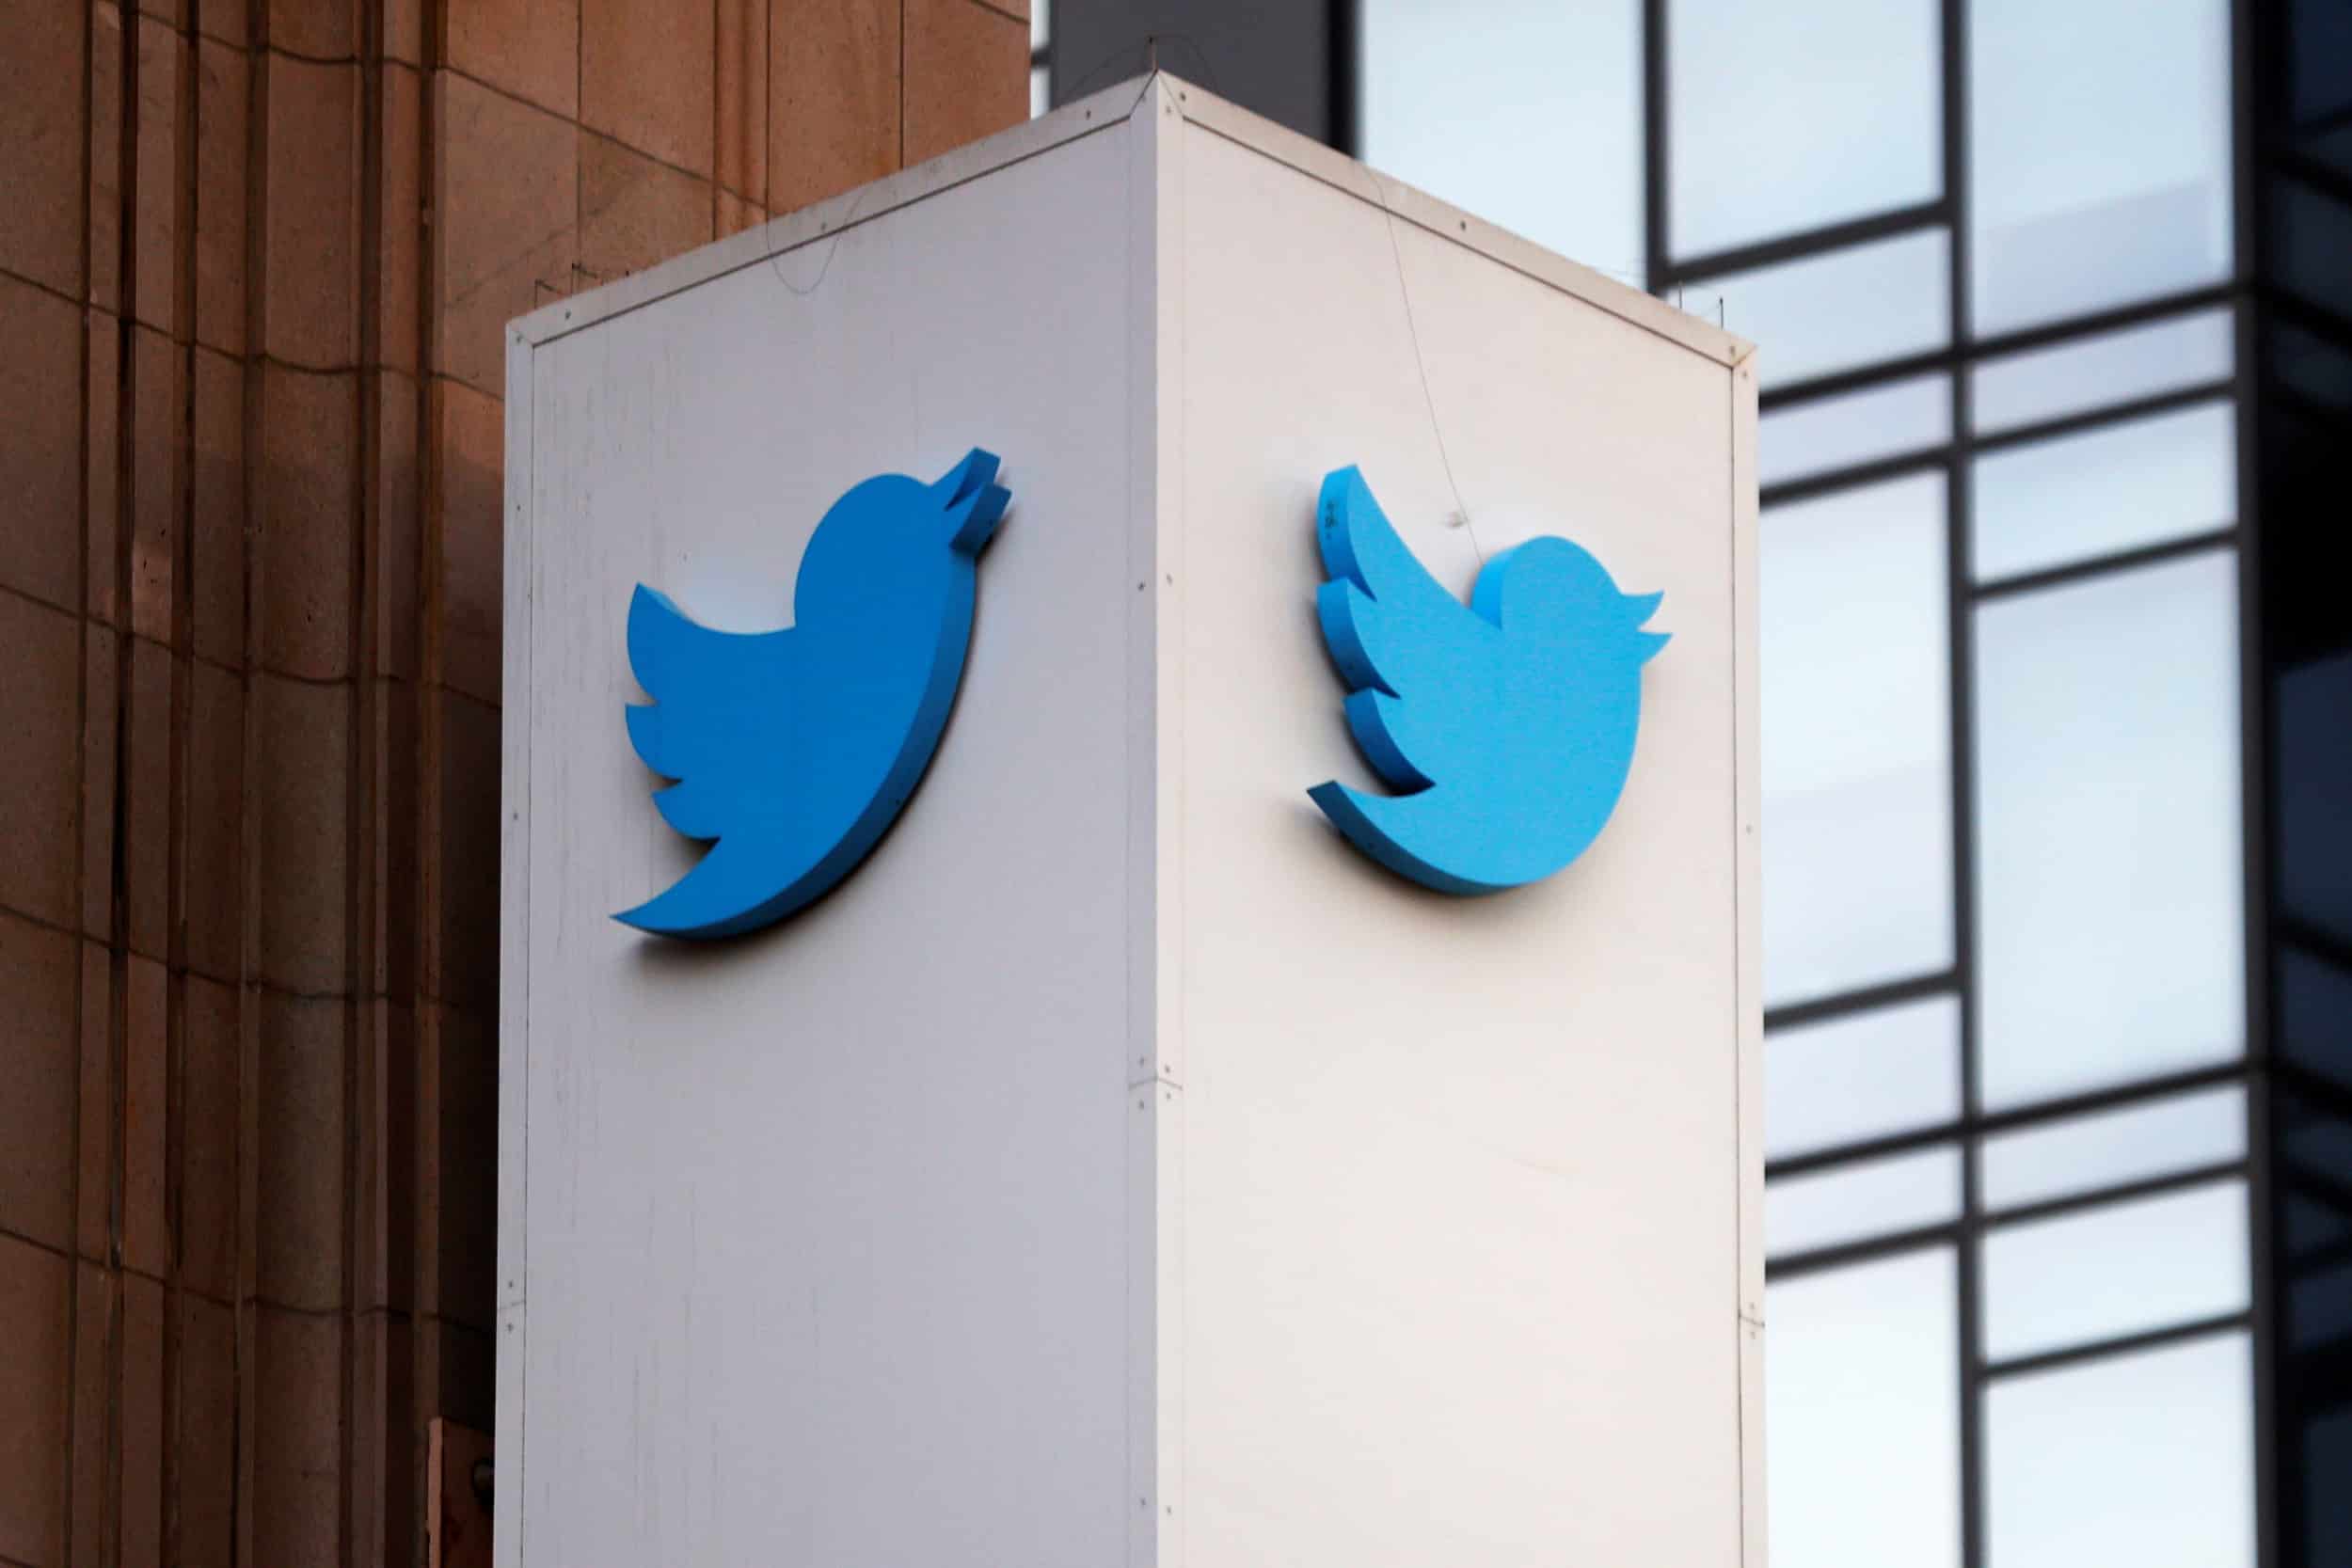 Twitter wants more time to comply with India’s new IT rules